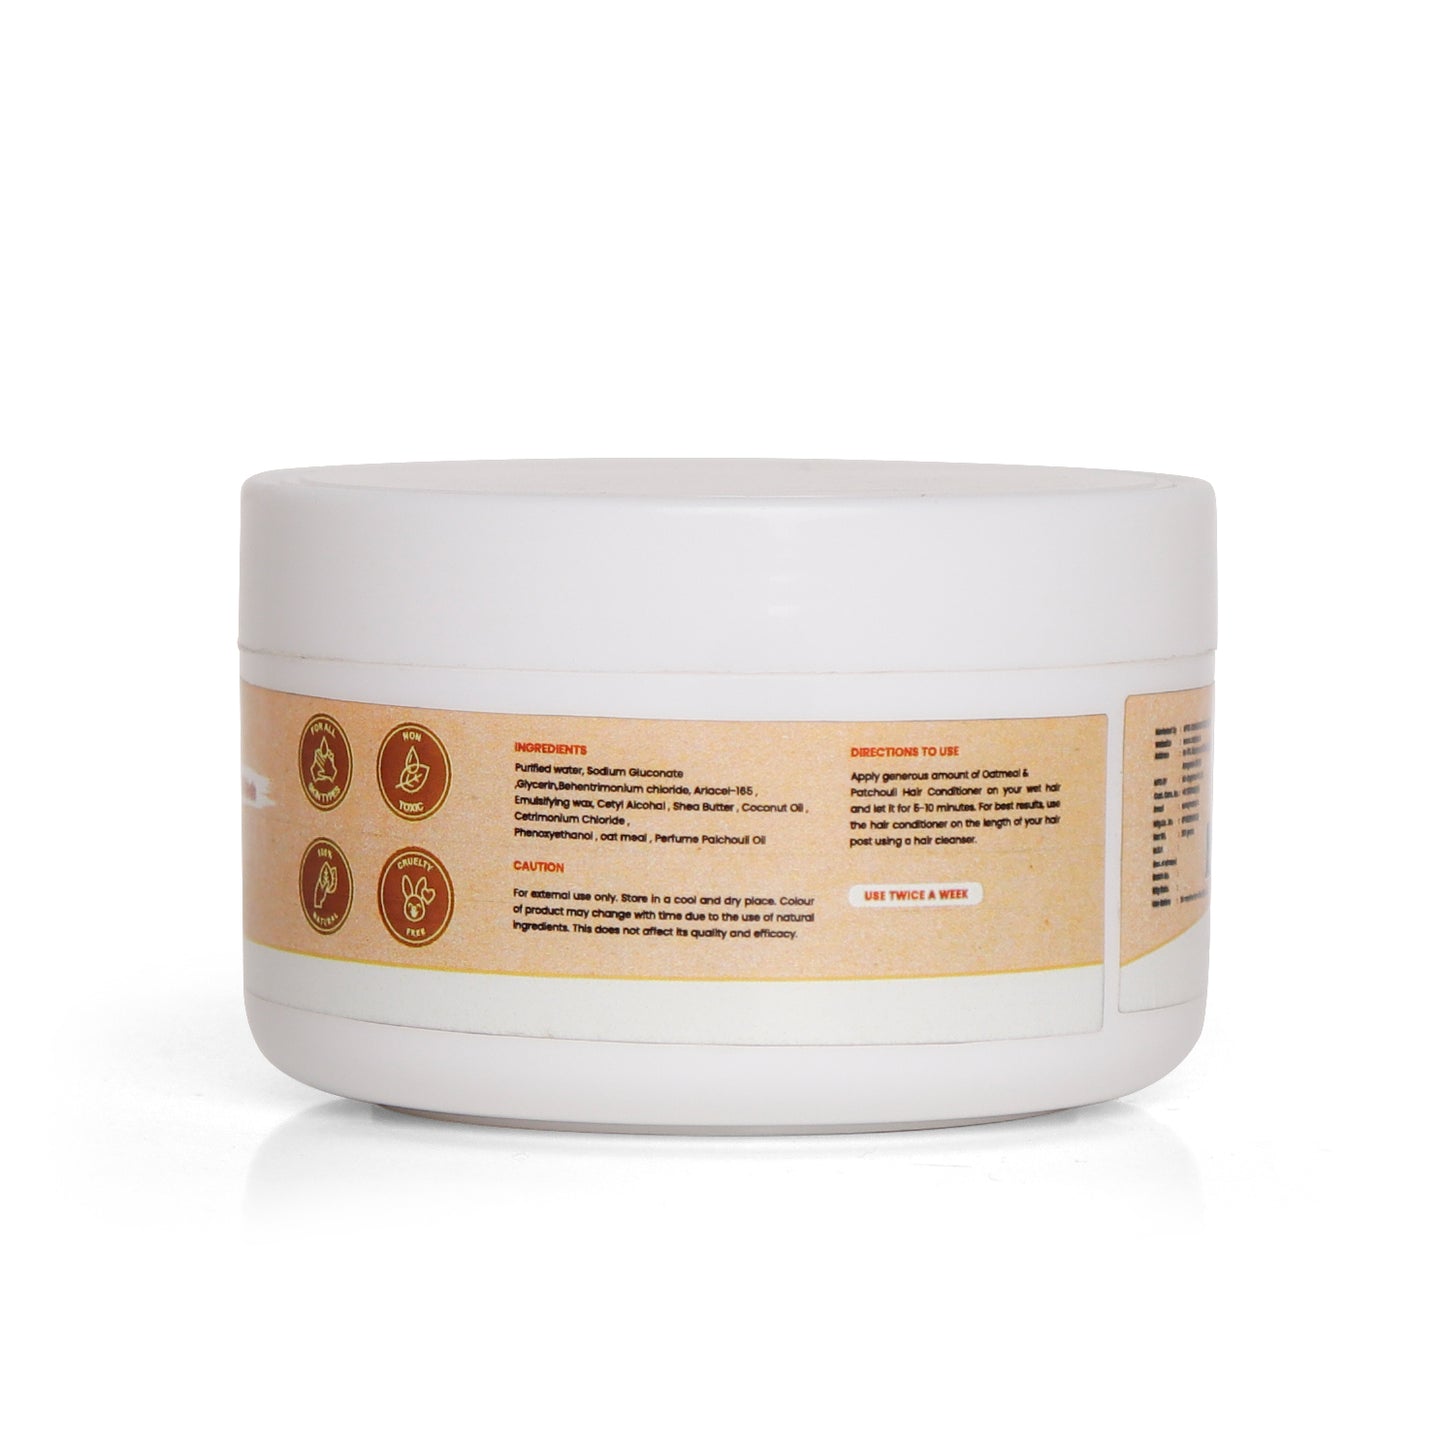 Oatmeal & Patchouli Hair Conditioner (200 gms)